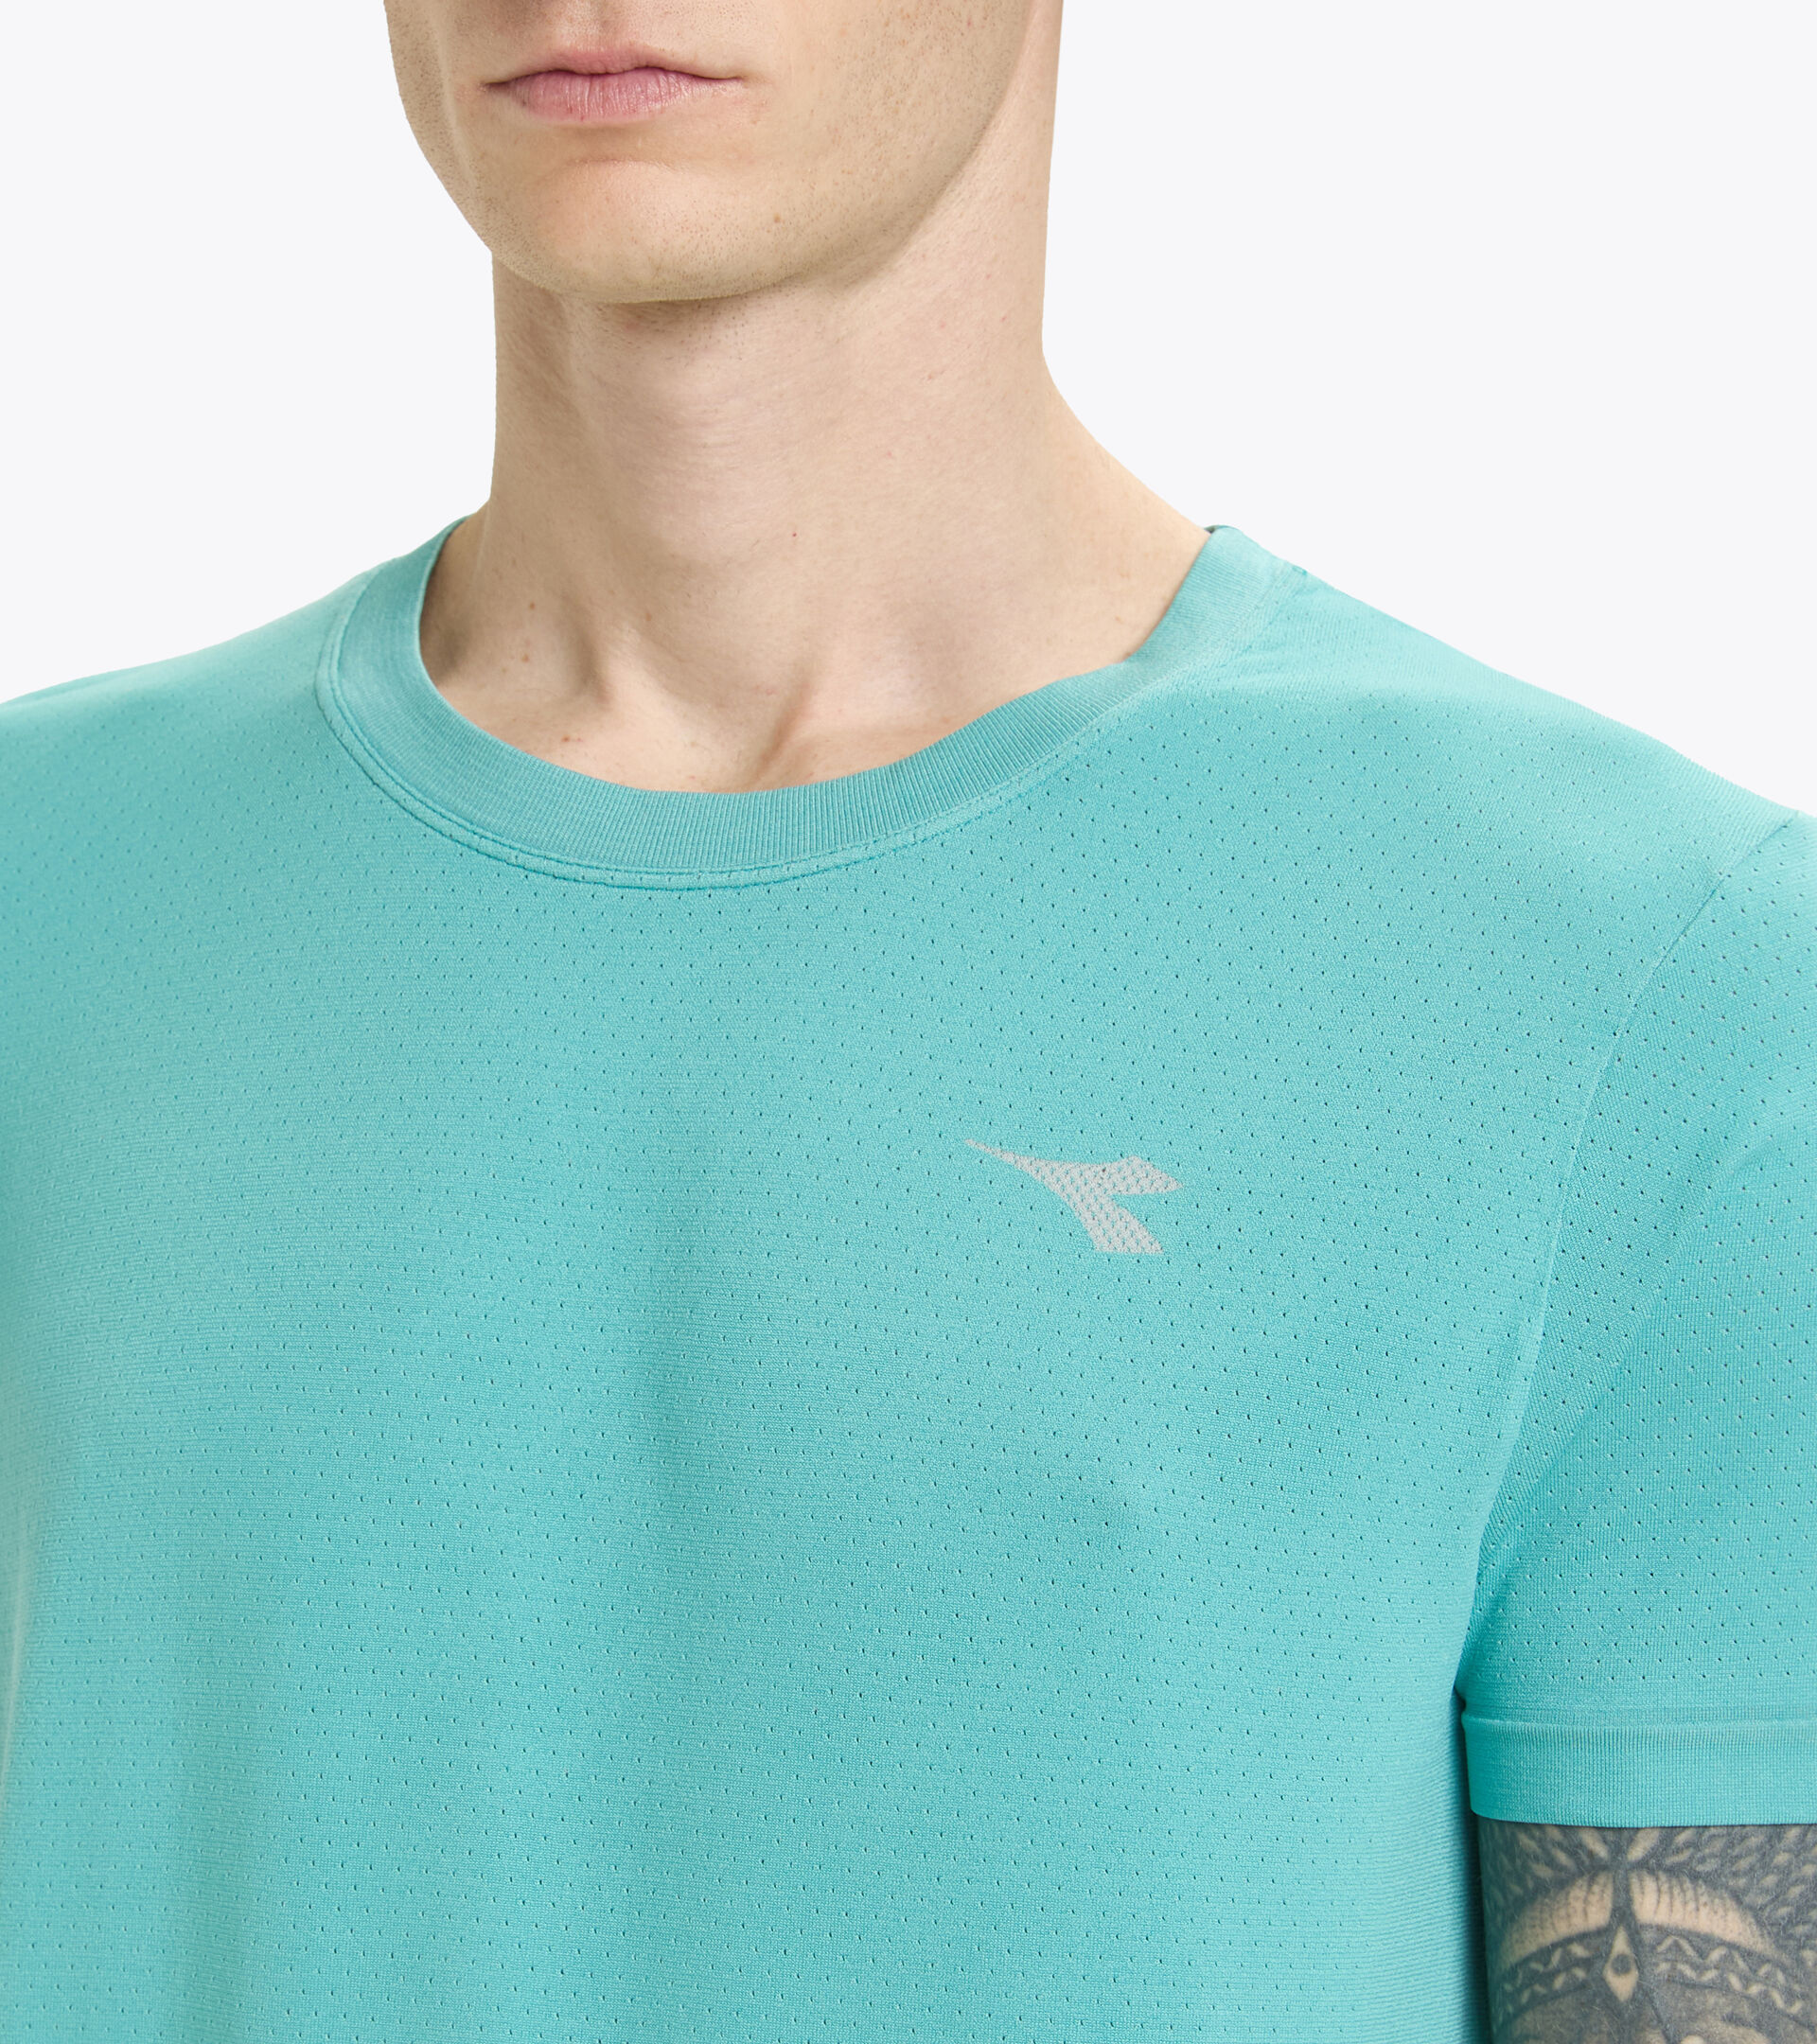 Lauf-T-Shirt ohne Nähte - made in Italy - Herren SS T-SHIRT SKIN FRIENDLY DUSTY TURQUOISE - Diadora